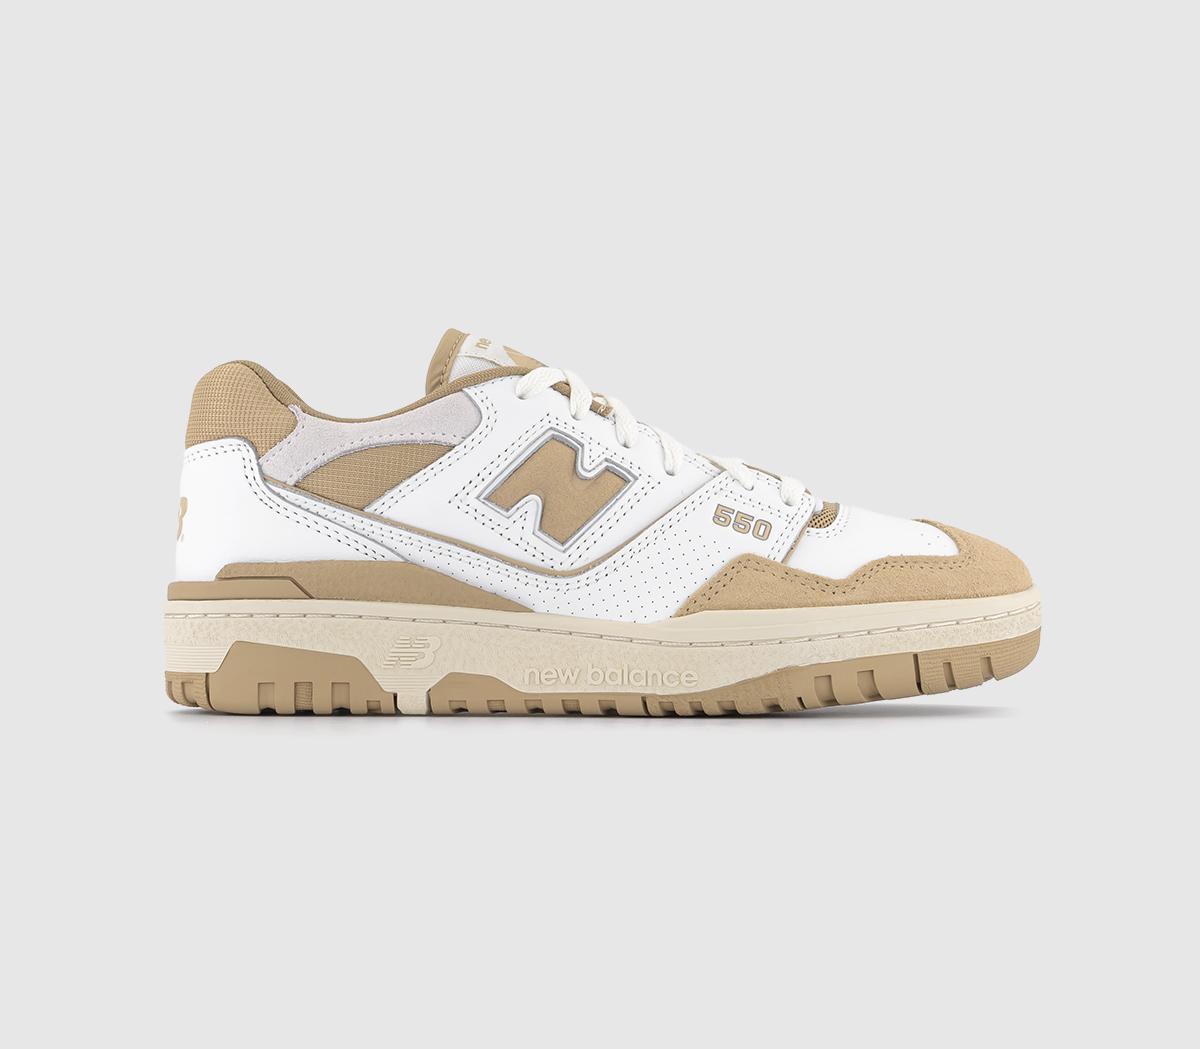 New Balance BB550 Trainers White Sand Offwhite - Unisex Sports